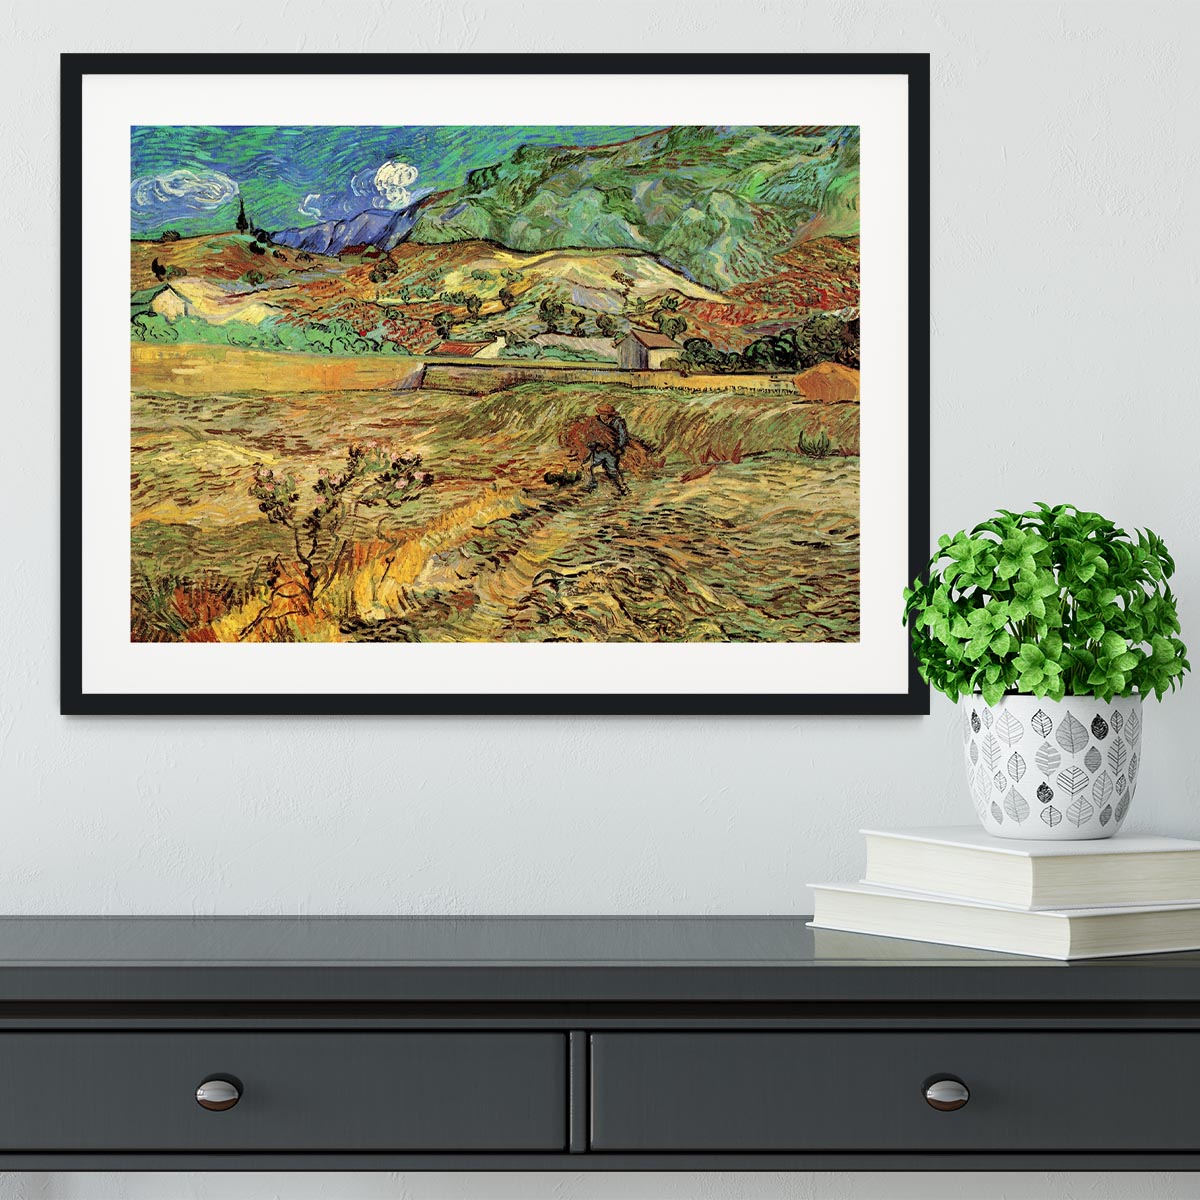 Enclosed Wheat Field with Peasant by Van Gogh Framed Print - Canvas Art Rocks - 1